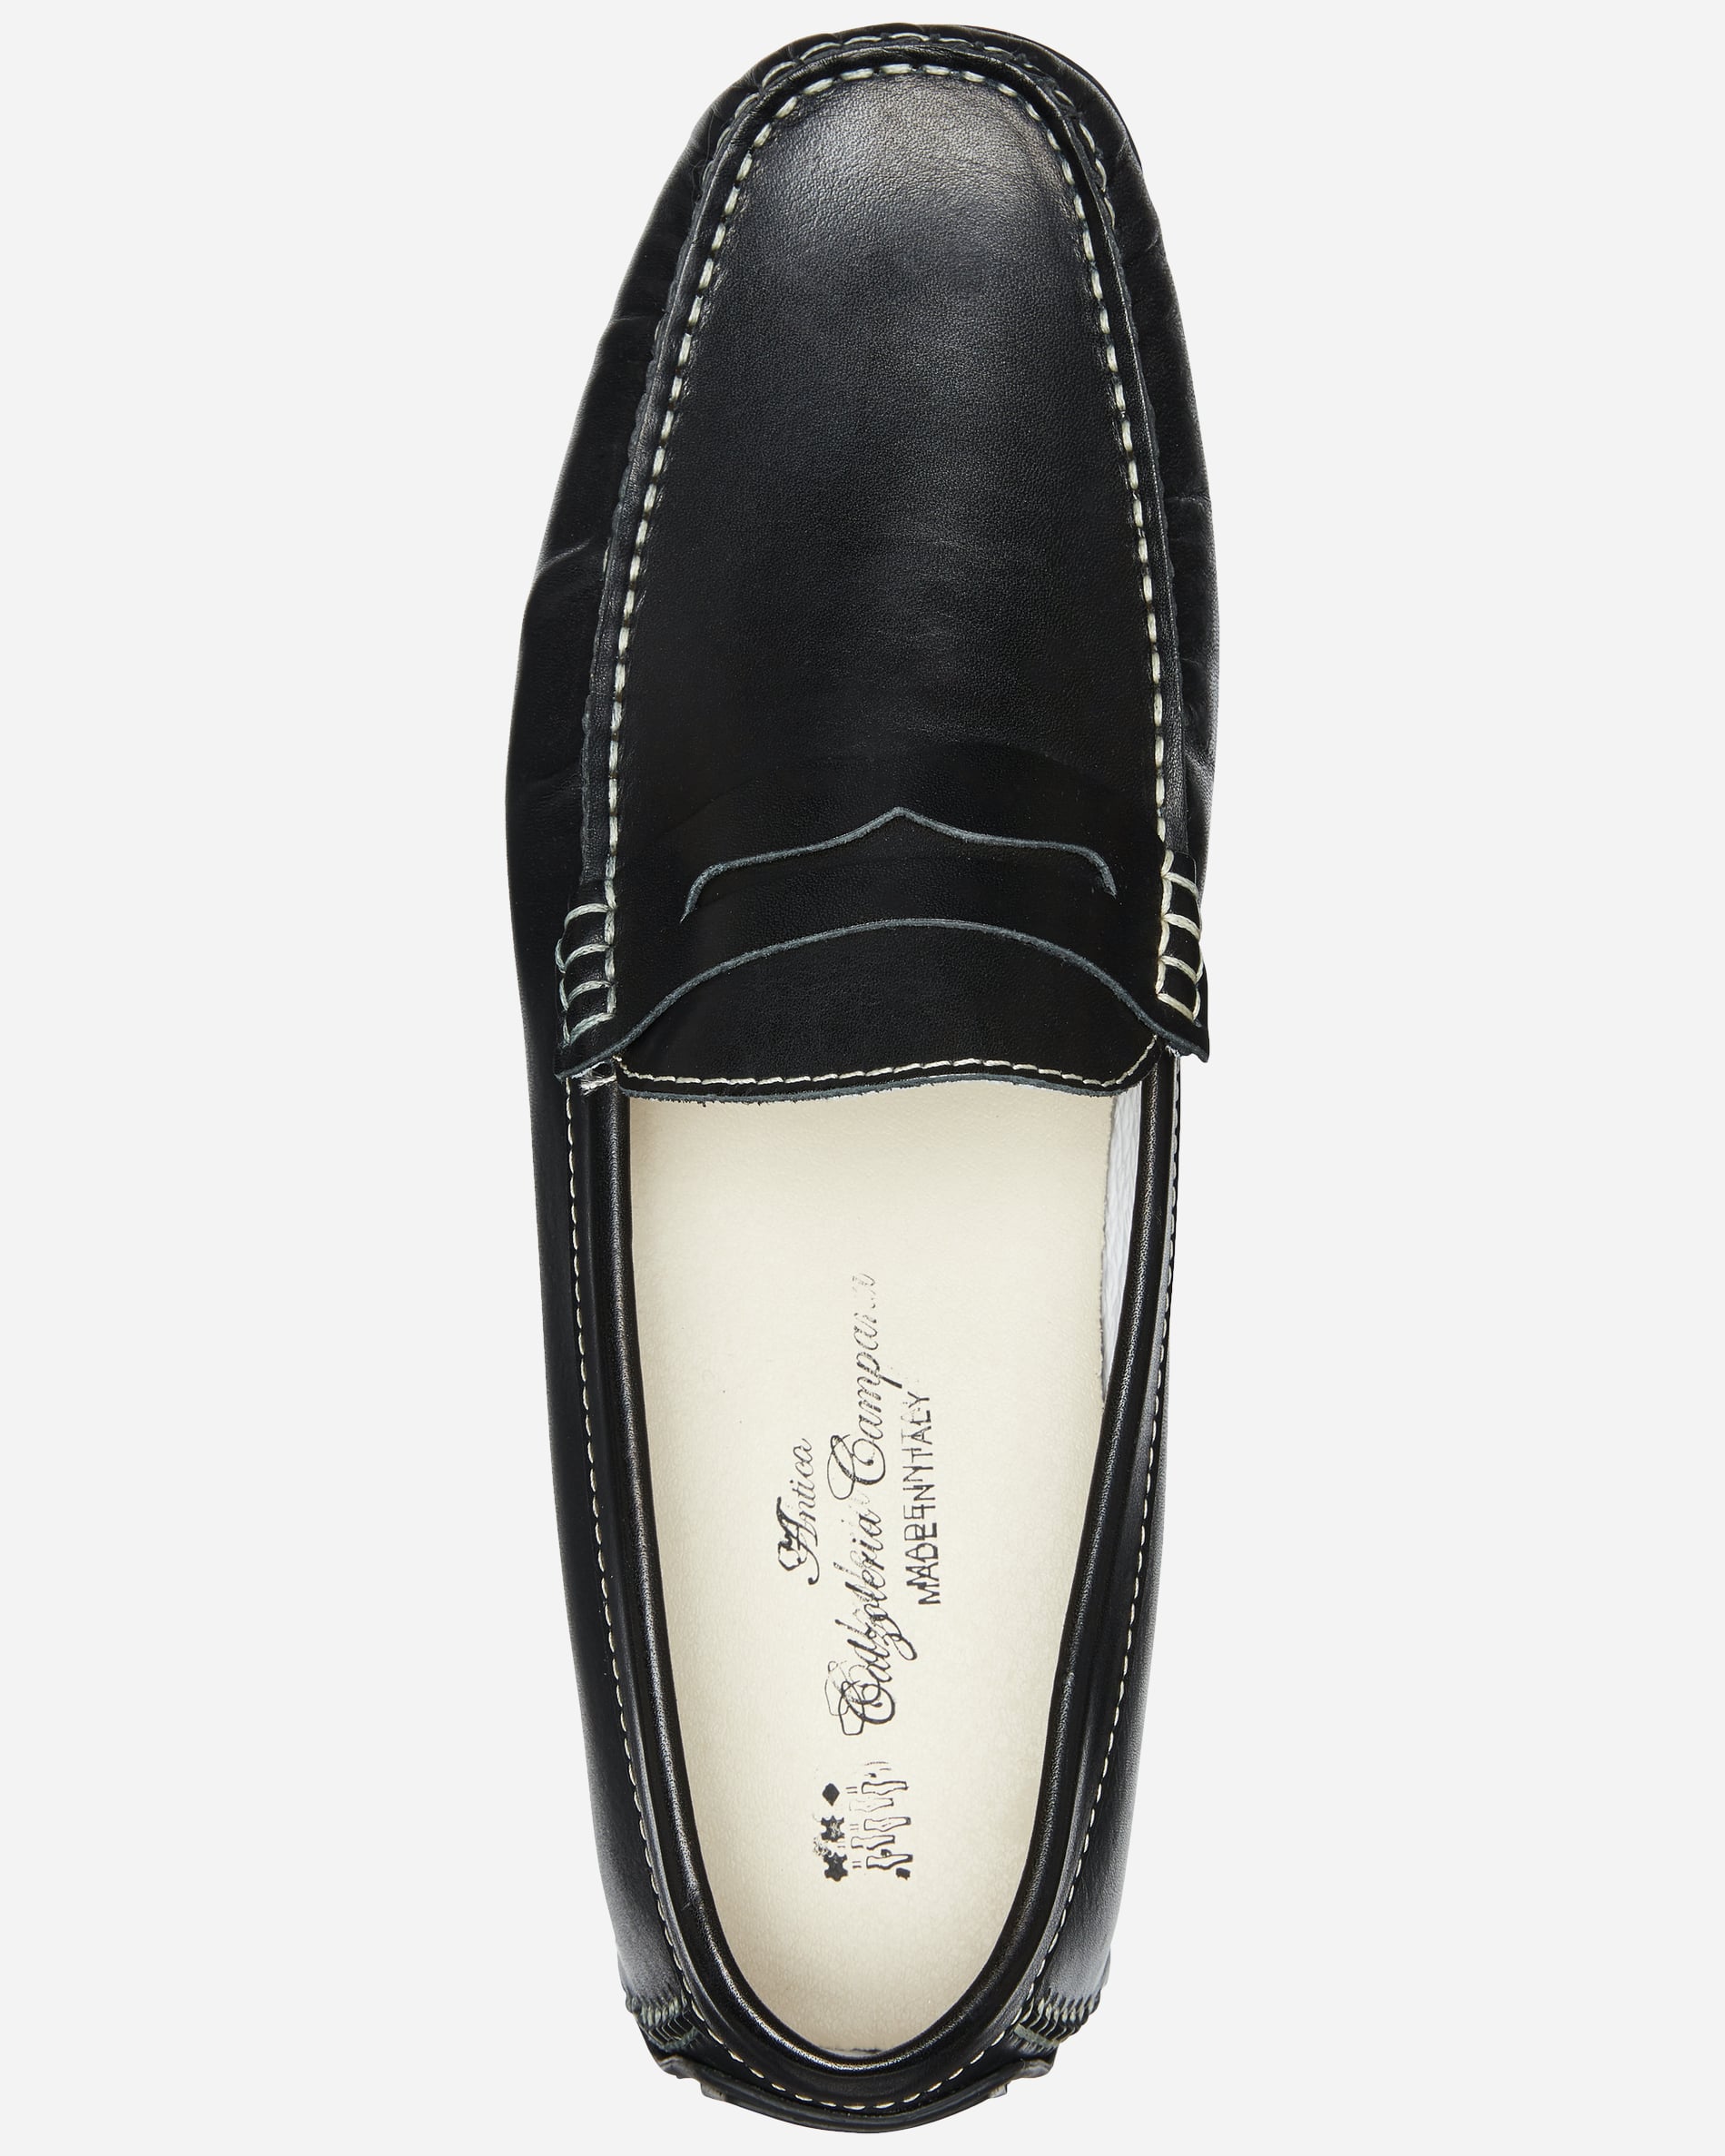 City Penny Loafers - Men's Loafers at Menzclub